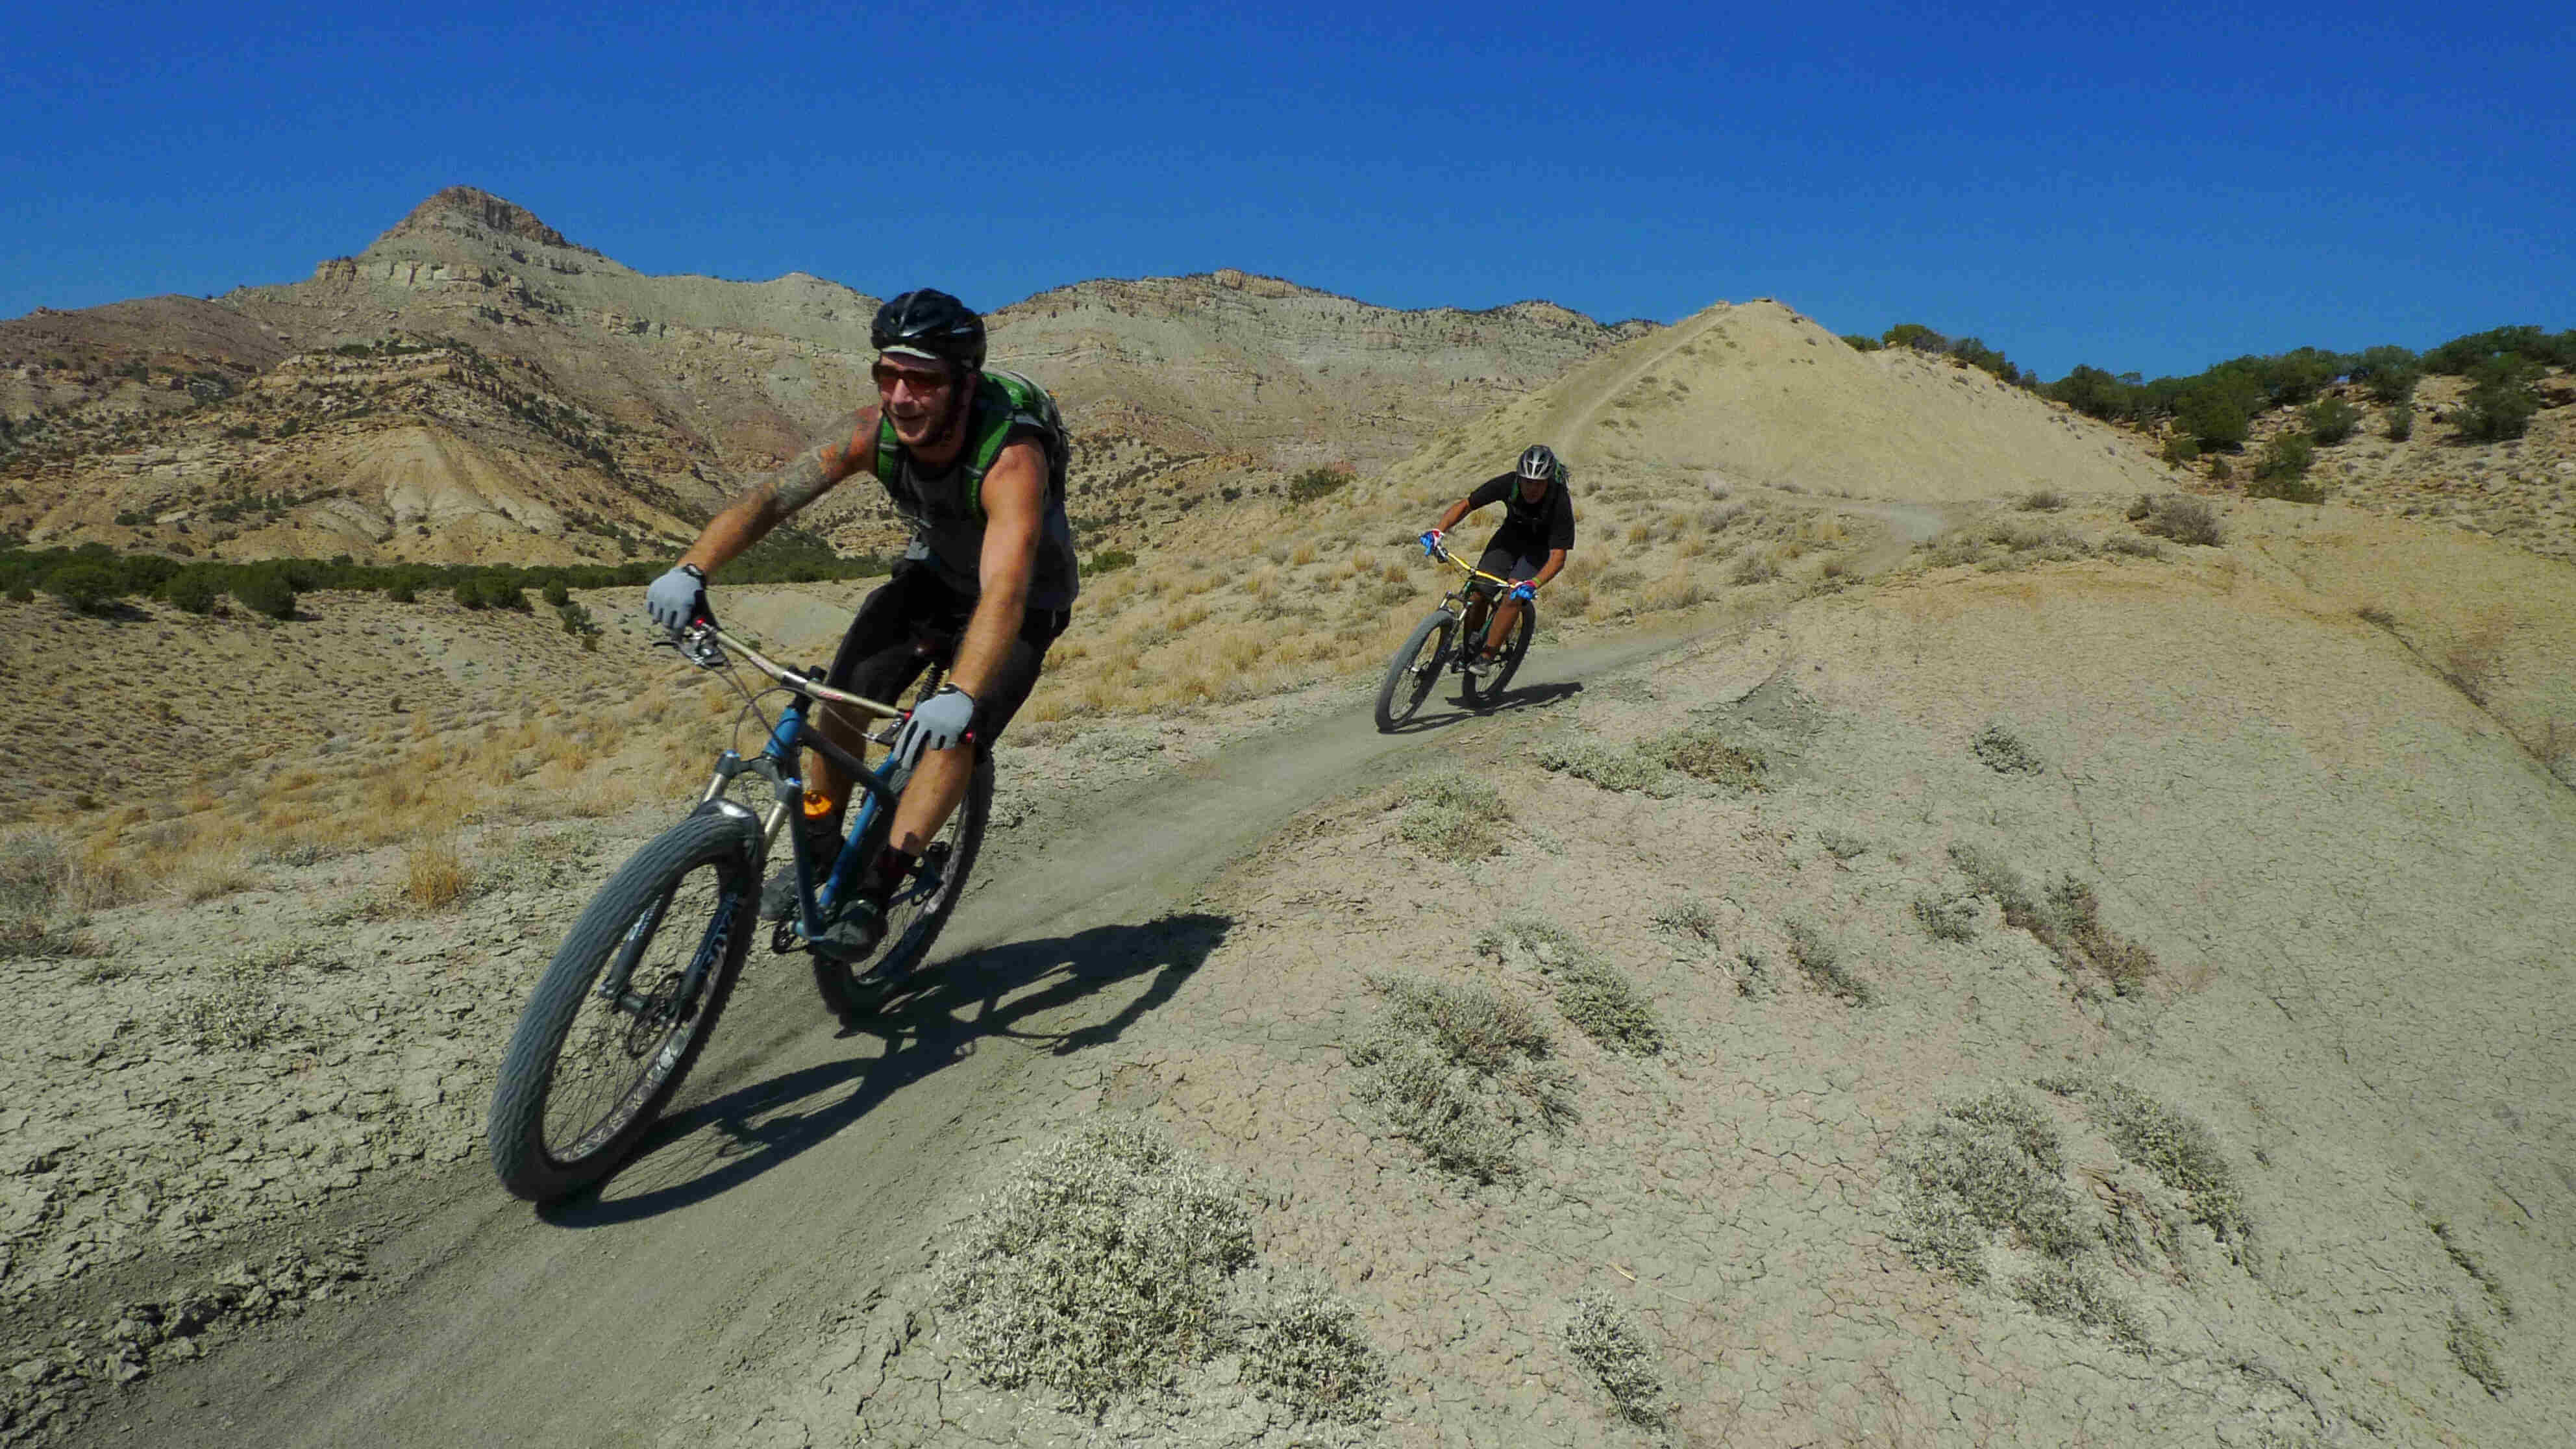 Front, left side view of 2 cyclists on Surly bikes, riding single file, down a trail on sandy, rock hills